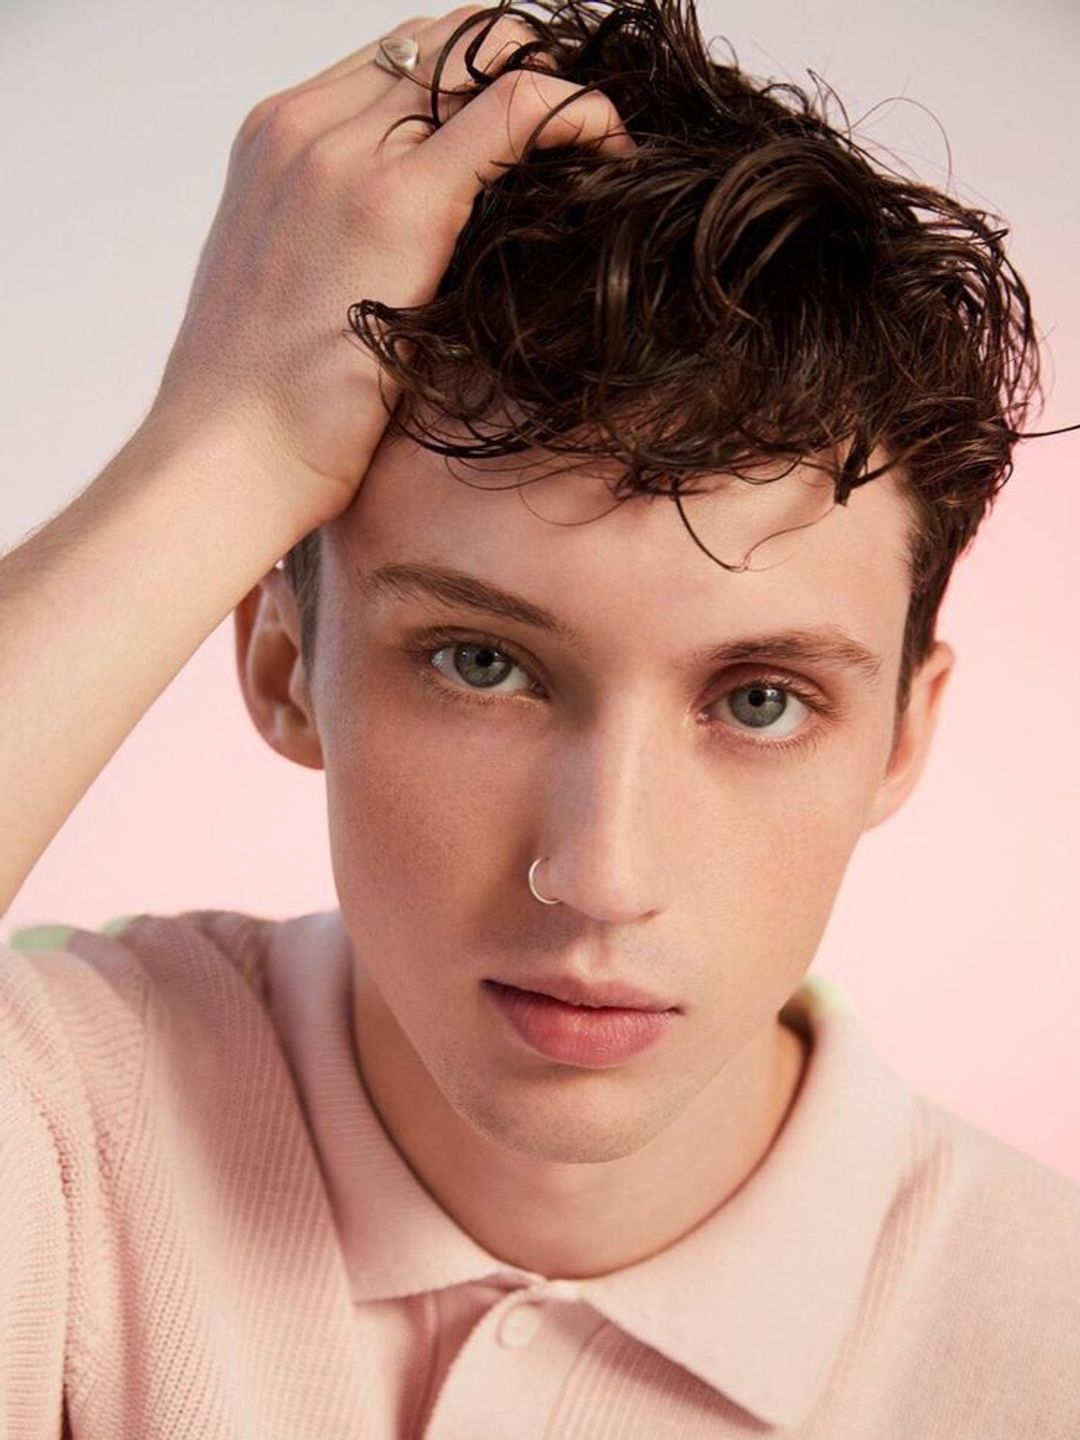 Troye Sivan how did he became famous